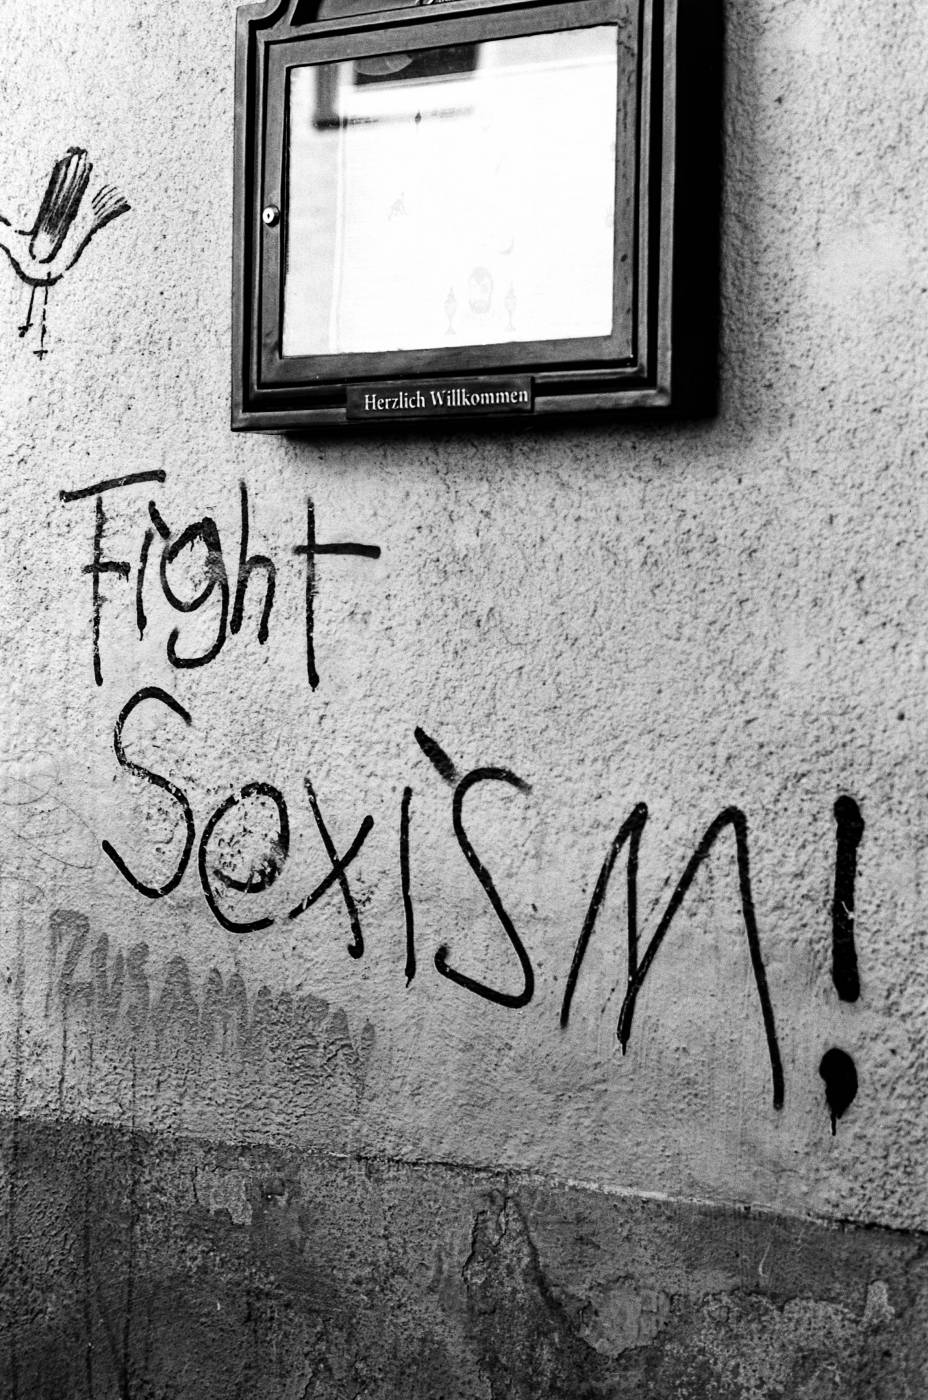 fight sexism protest/ picture